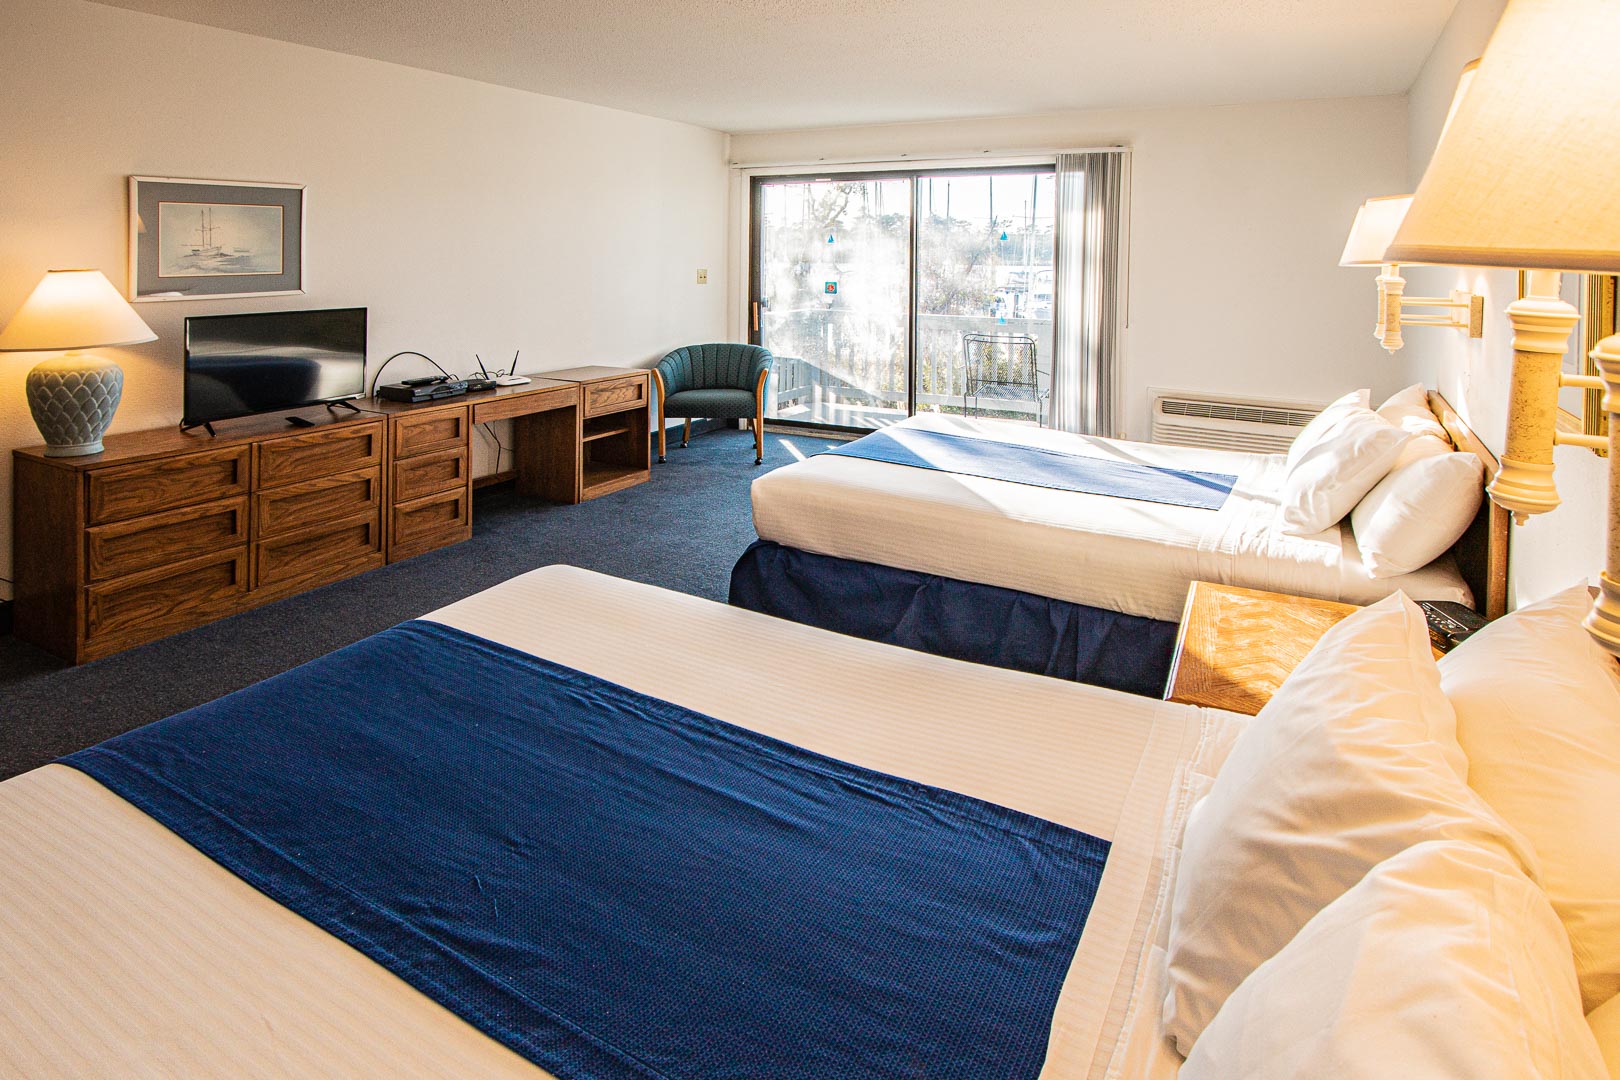 A spacious bedroom with double beds at VRI's Harbourside II in New Bern, North Carolina.